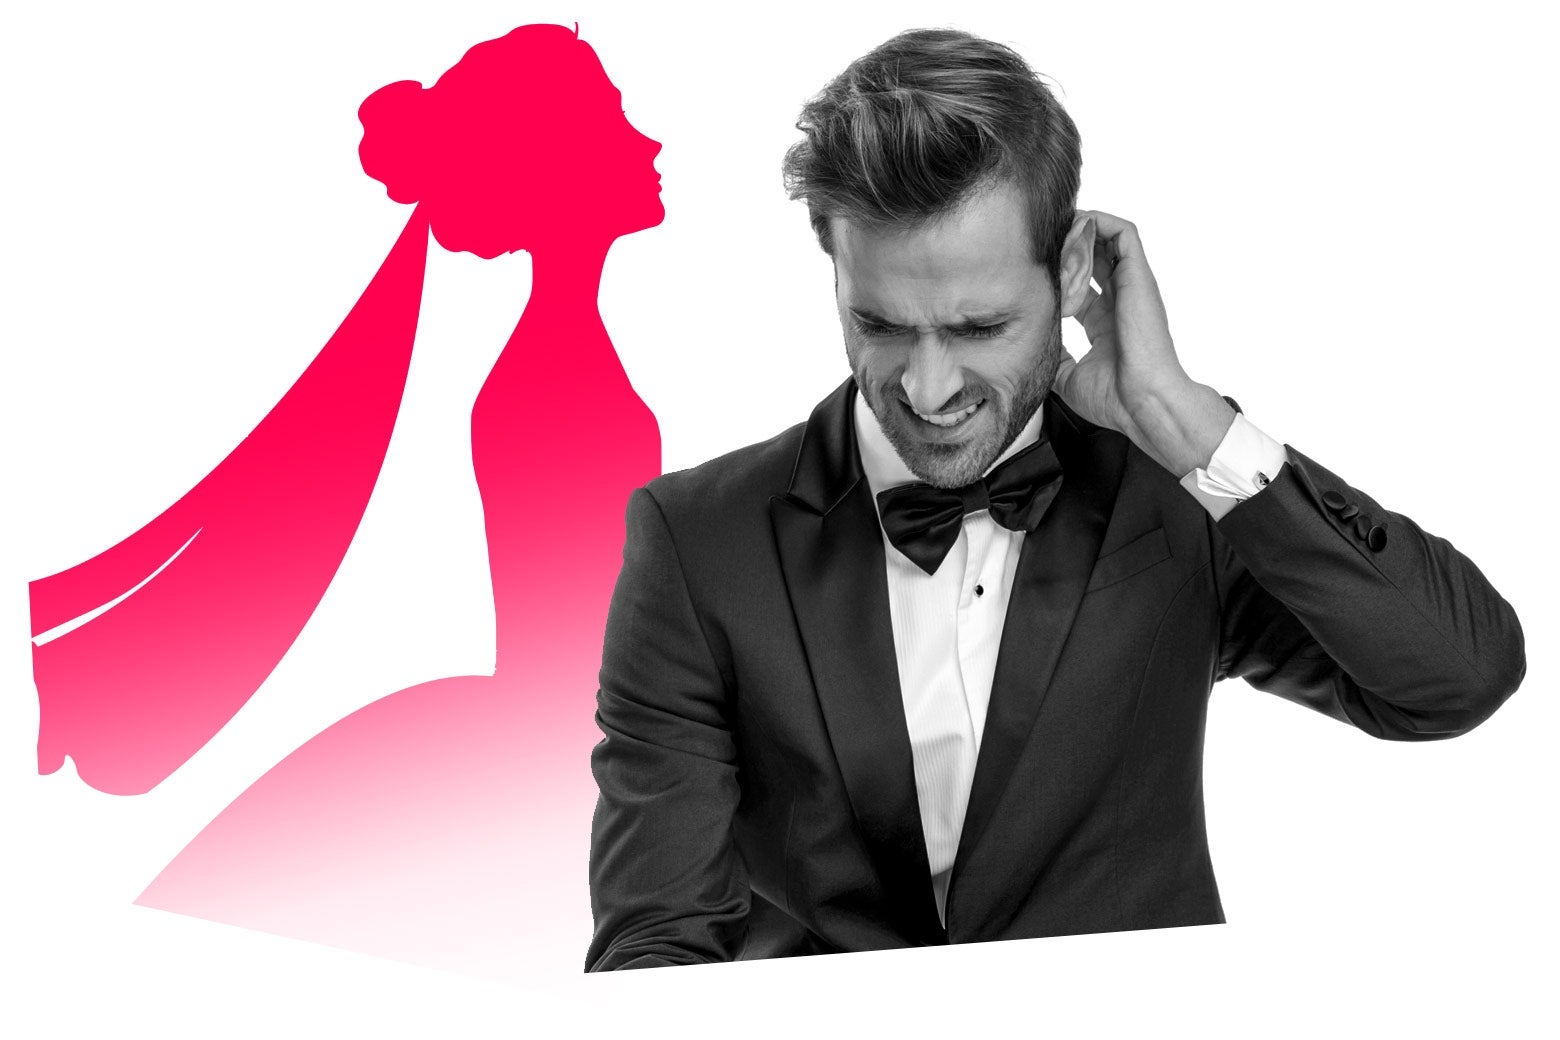 Man in tux looks uncomfortable with an illustrated silhouette of a bride behind him.